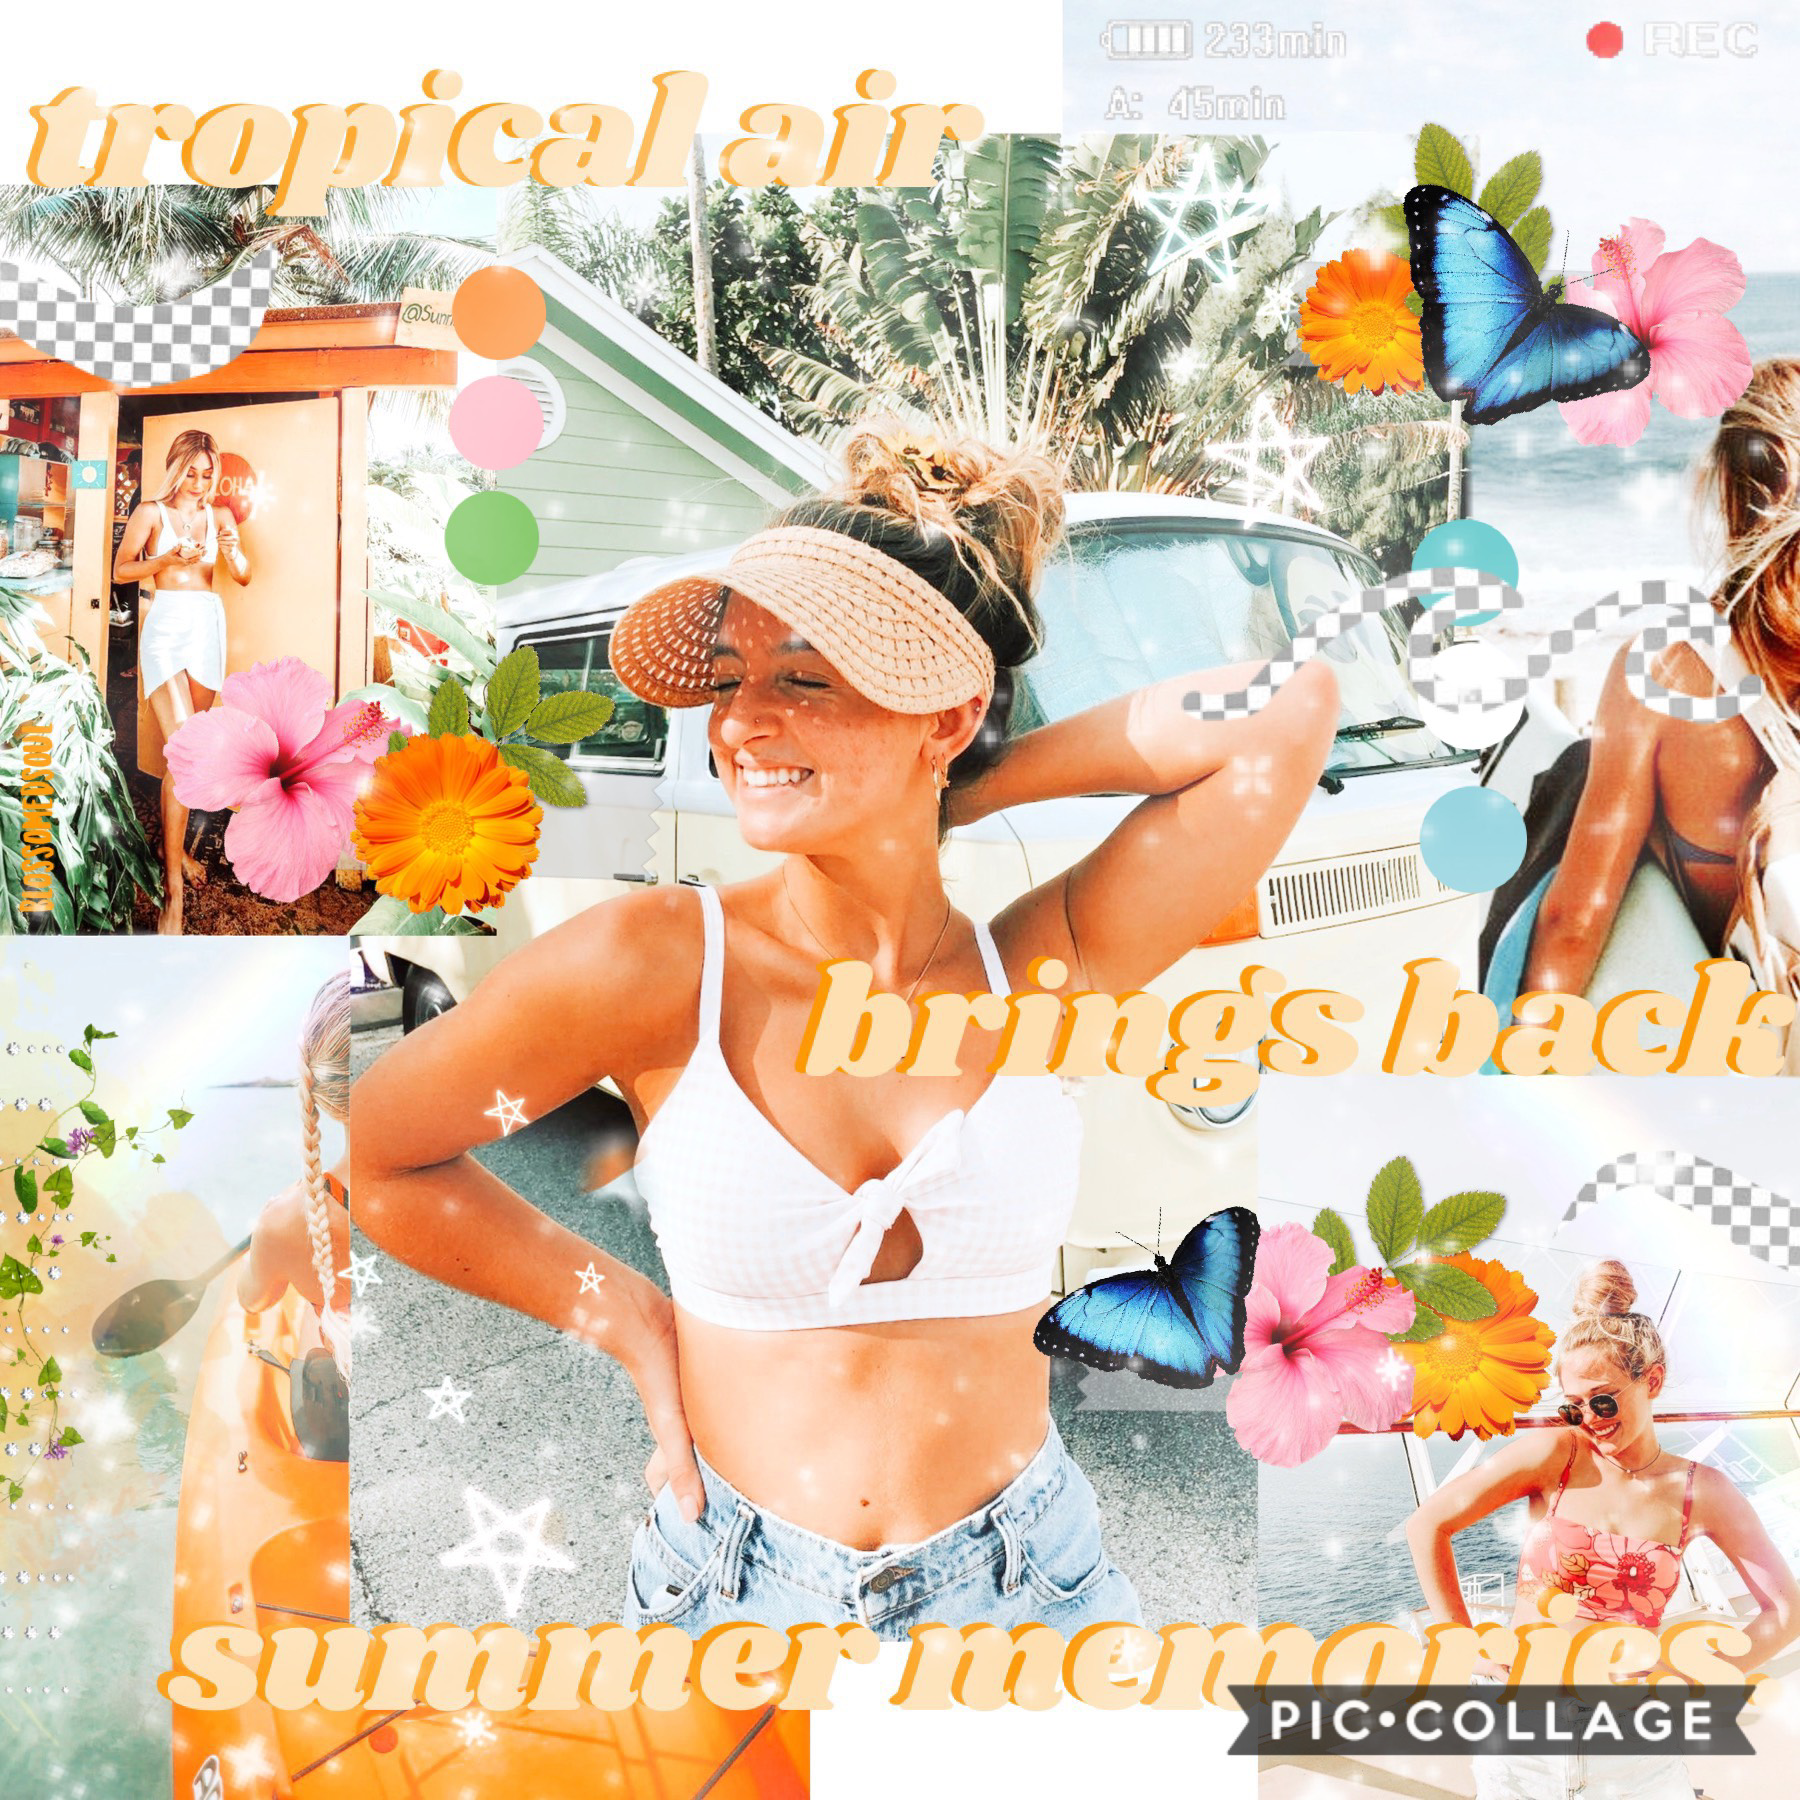 [ t a p ] 

entry to a games :) how are you all doing? summer is almost over for me and i still have some reading to do 😅🧡 i figured i might as well post this bc it goes with my account theme 🍃💓 still kinda low on ideas though but hope this post is okay 🦋